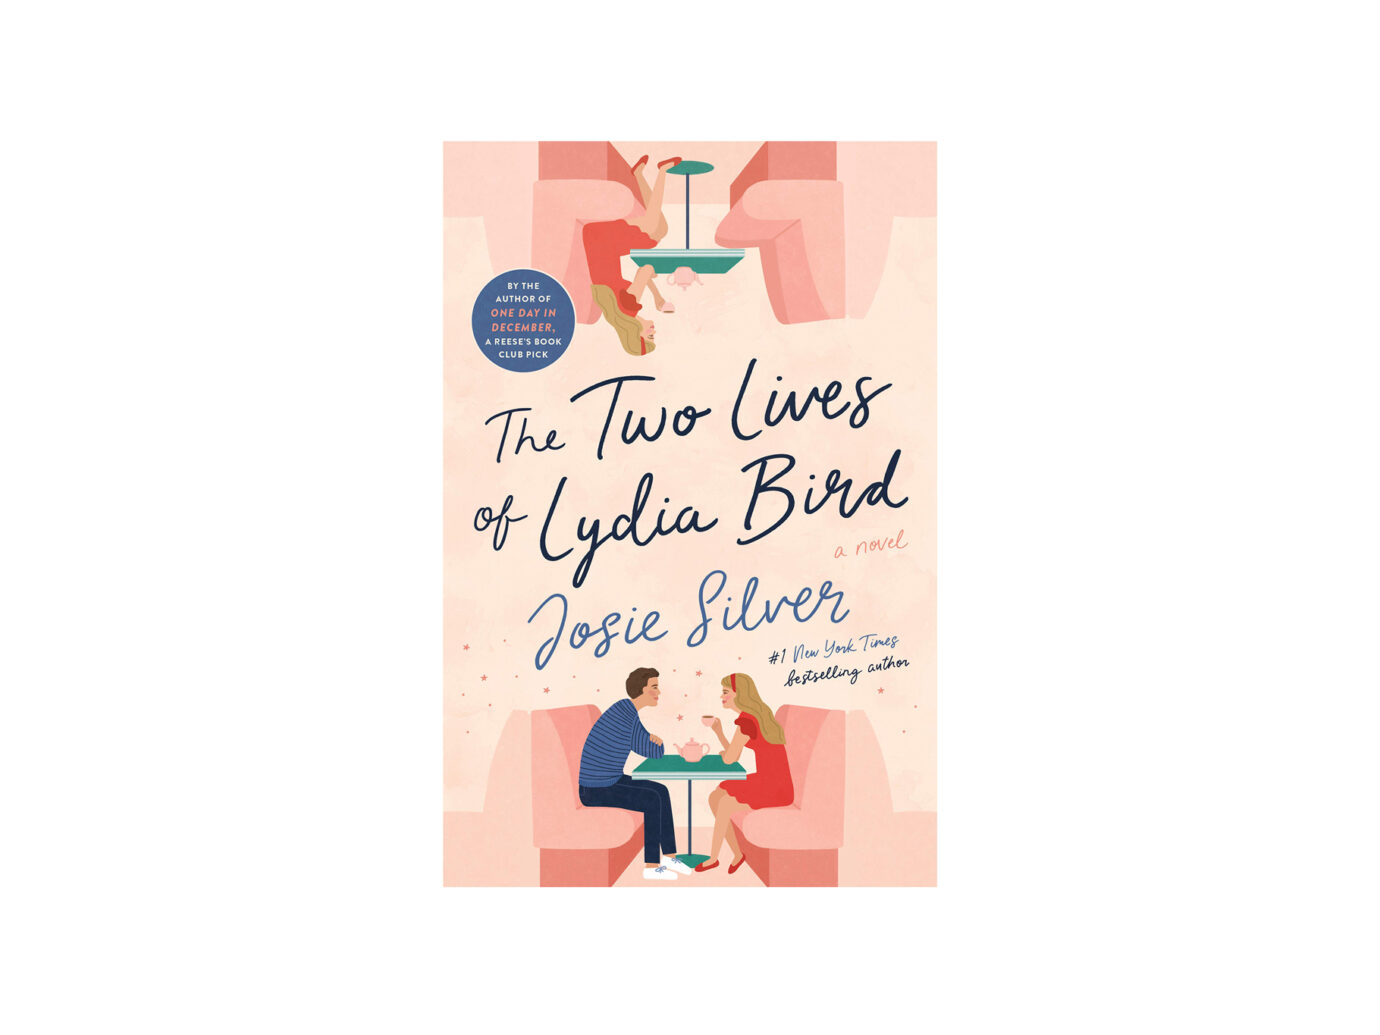 The Two Lives of Lydia Bird: A Novel